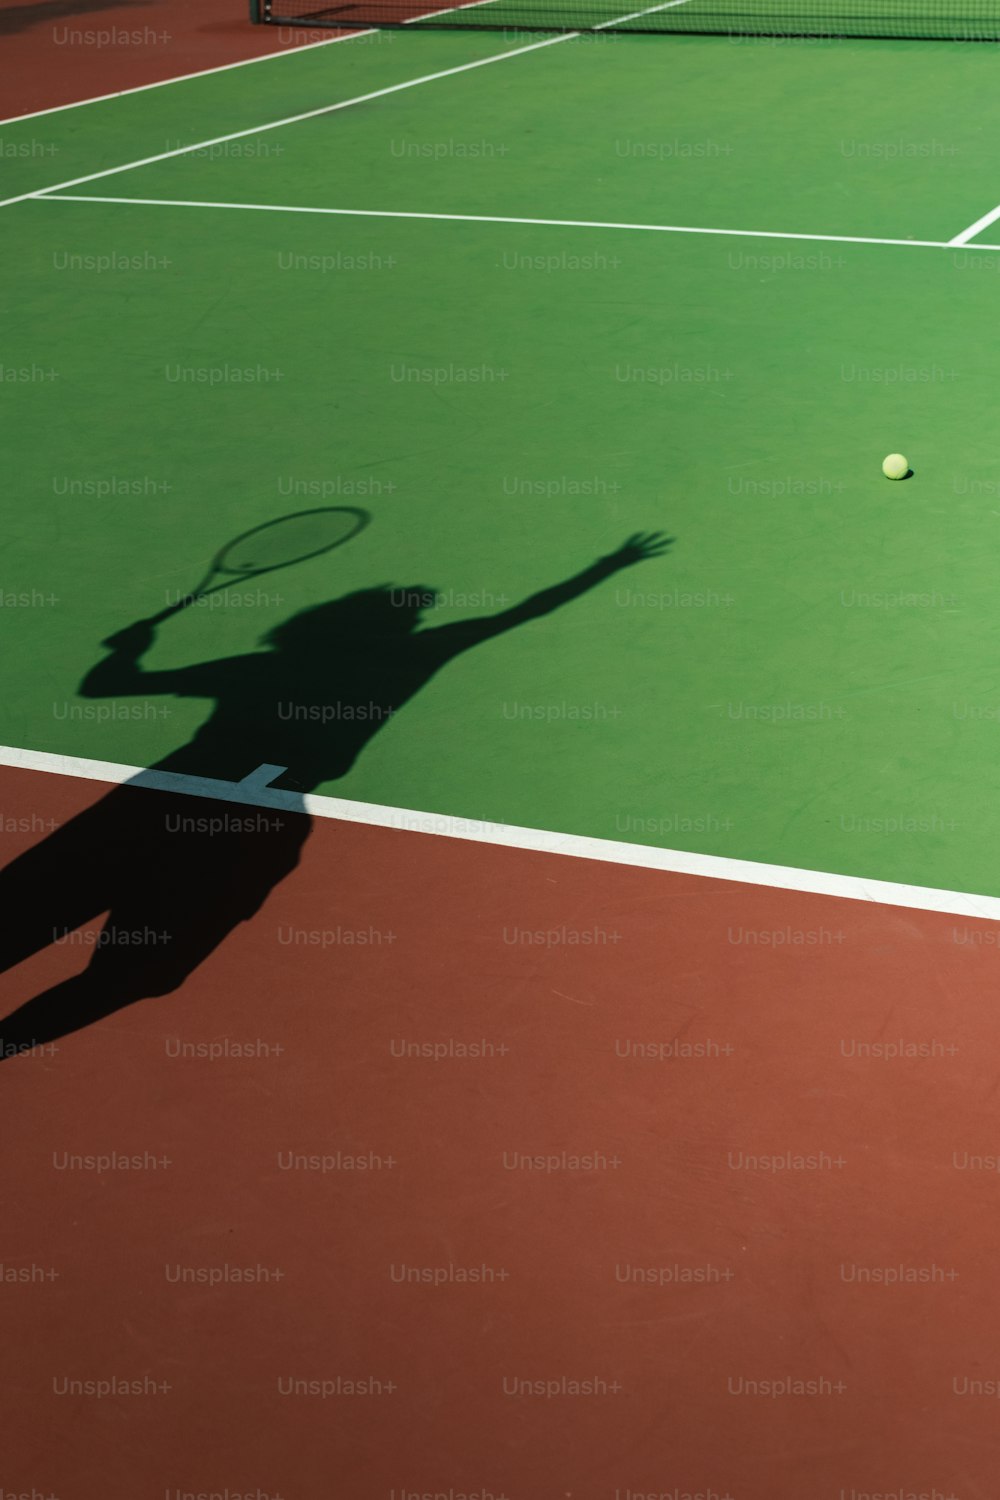 a shadow of a person on a tennis court